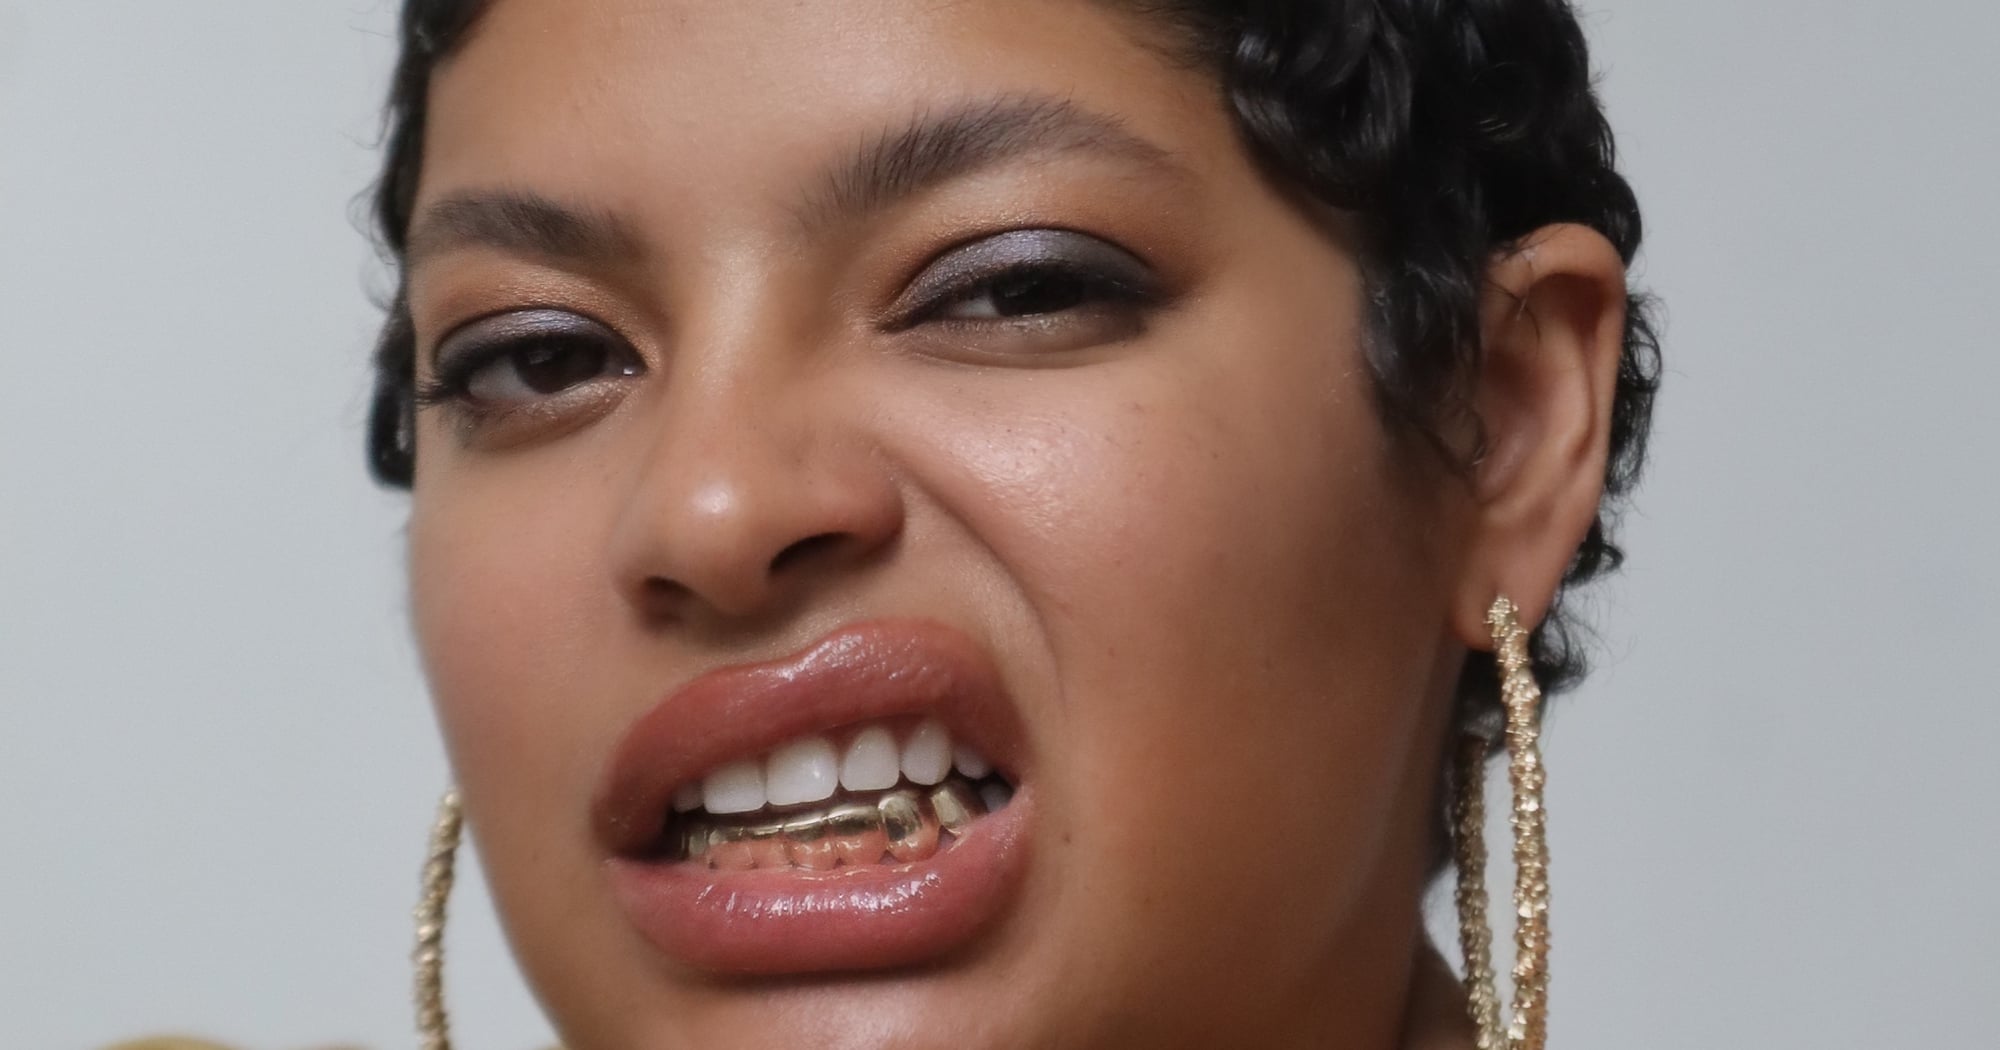 These Grillz Are Actually Good For Your Teeth